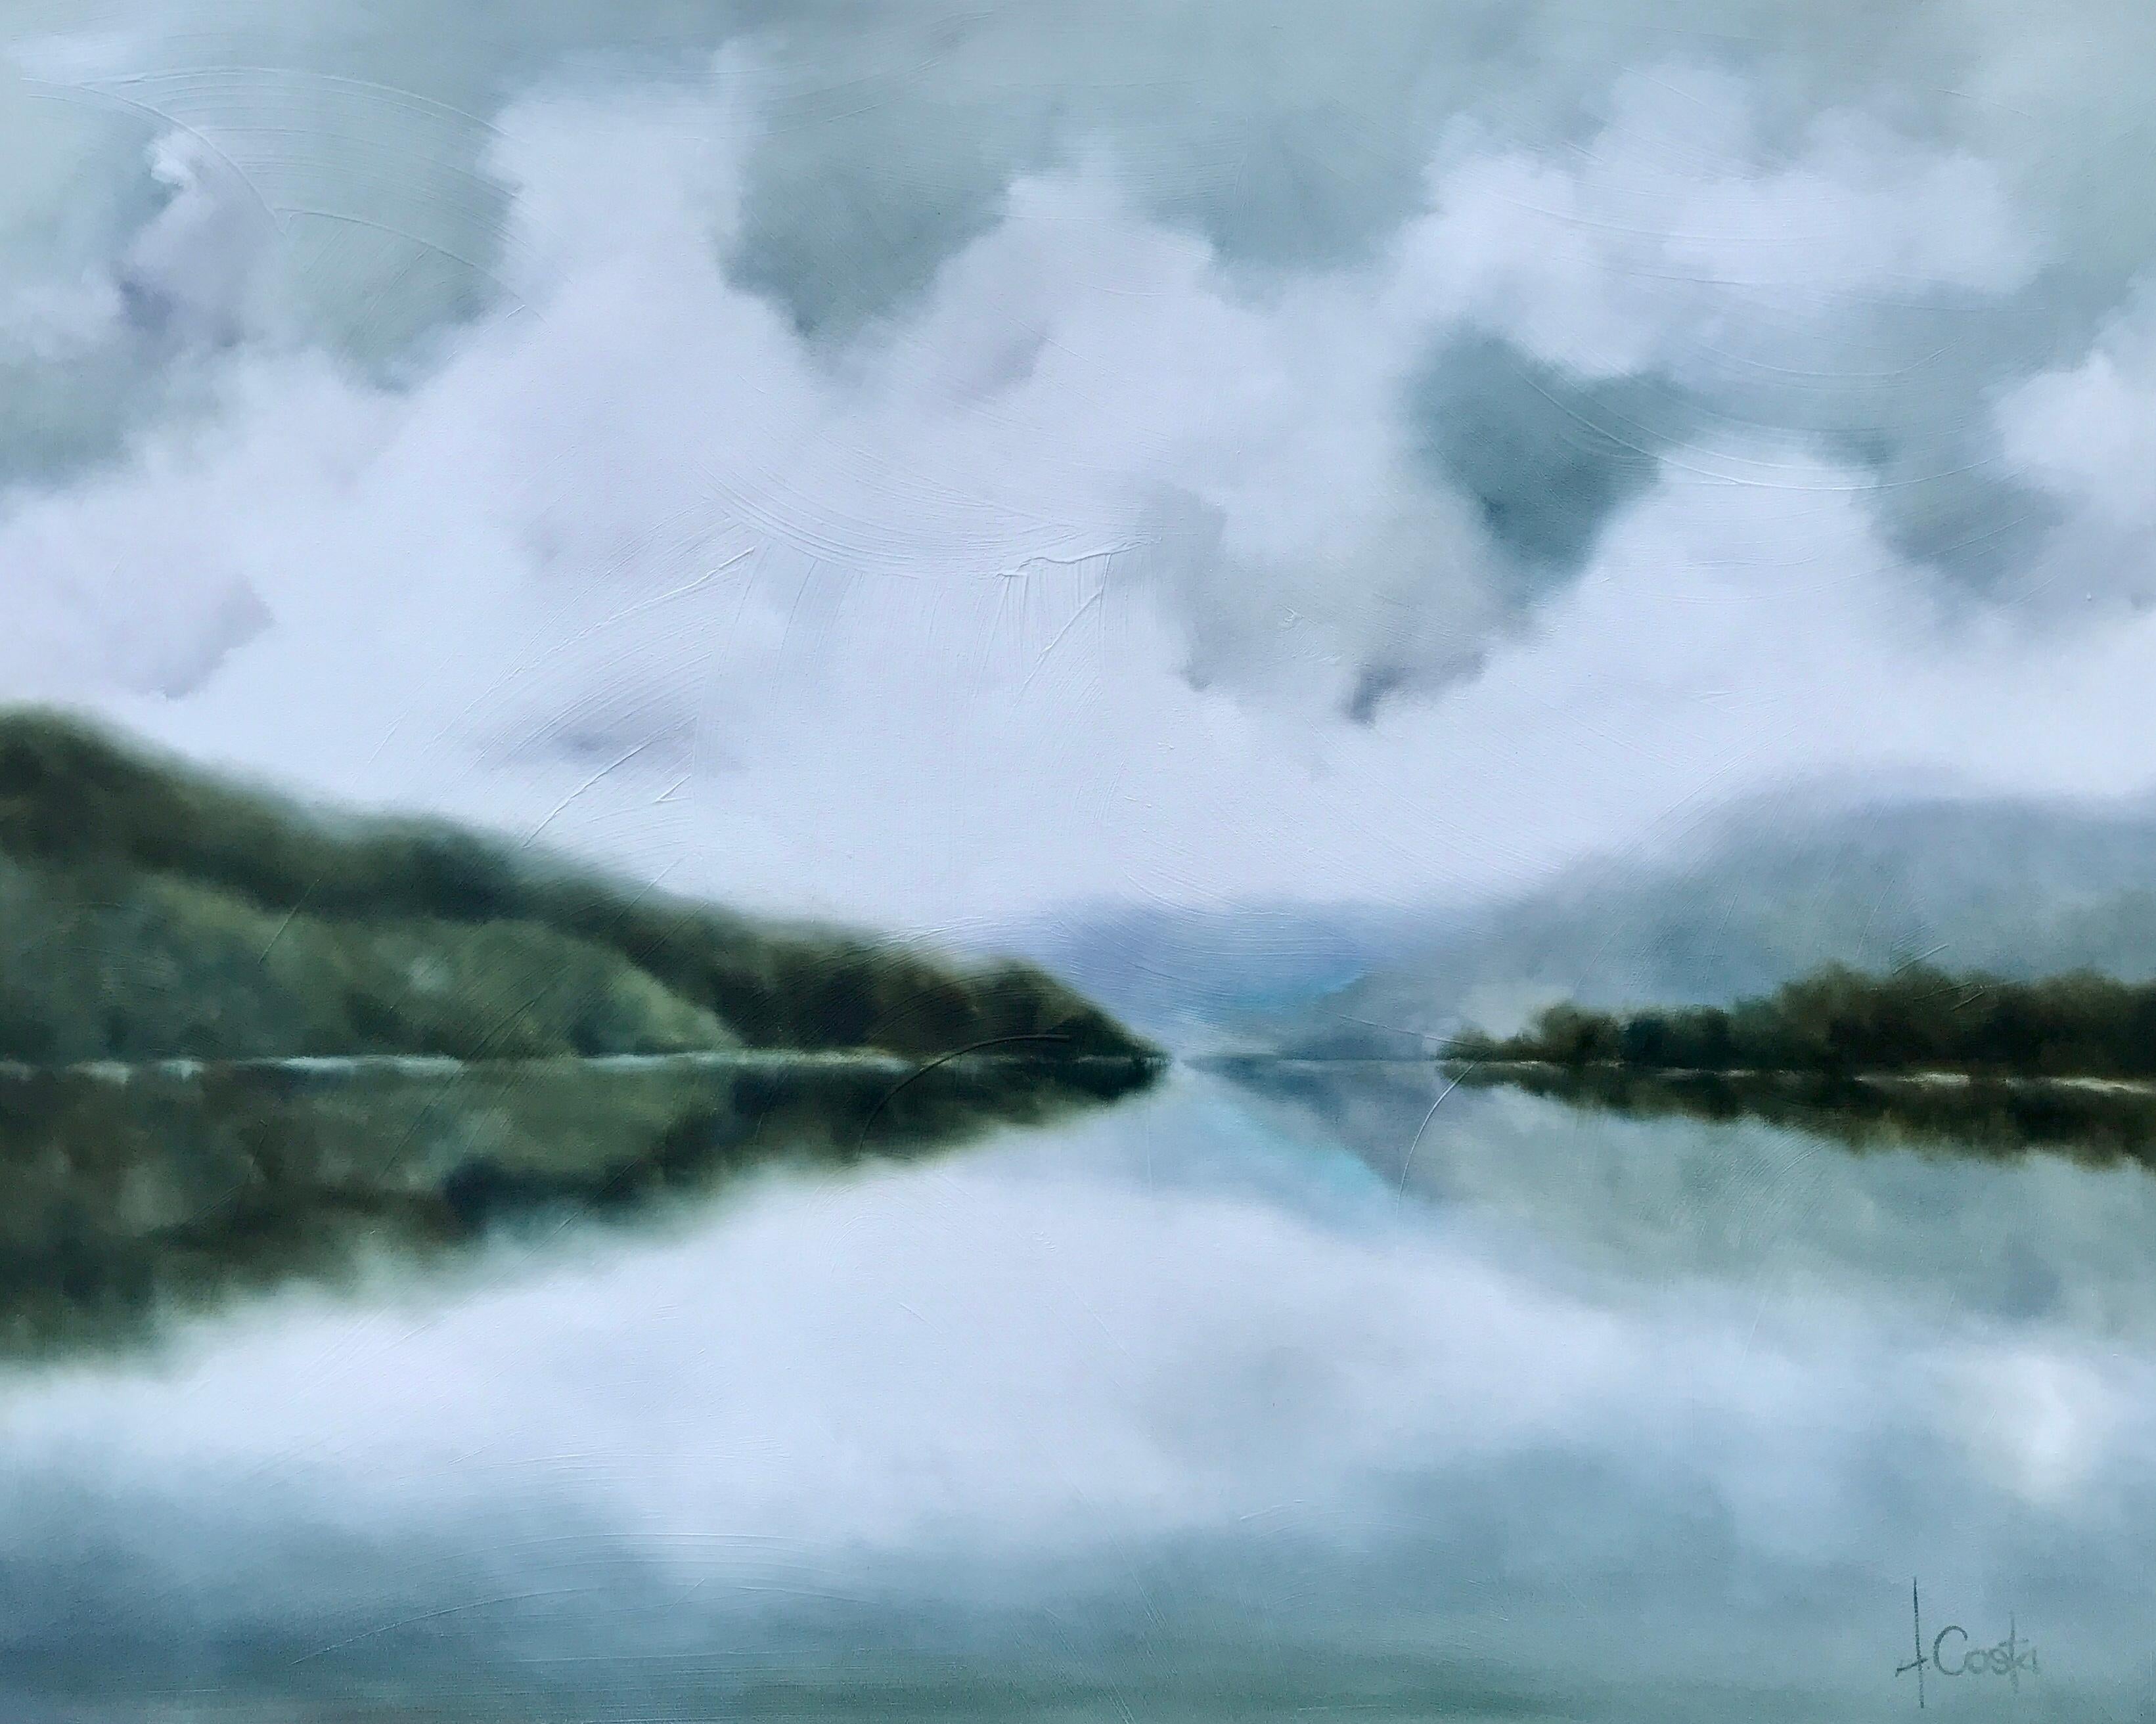 'Lost in Thought' is a large Impressionist oil on gessoed canvas landscape painting created by American artist Andrea Costa in 2018. Featuring a soft palette mostly made of grey, purple, green light blue and white colors, this horizontal painting